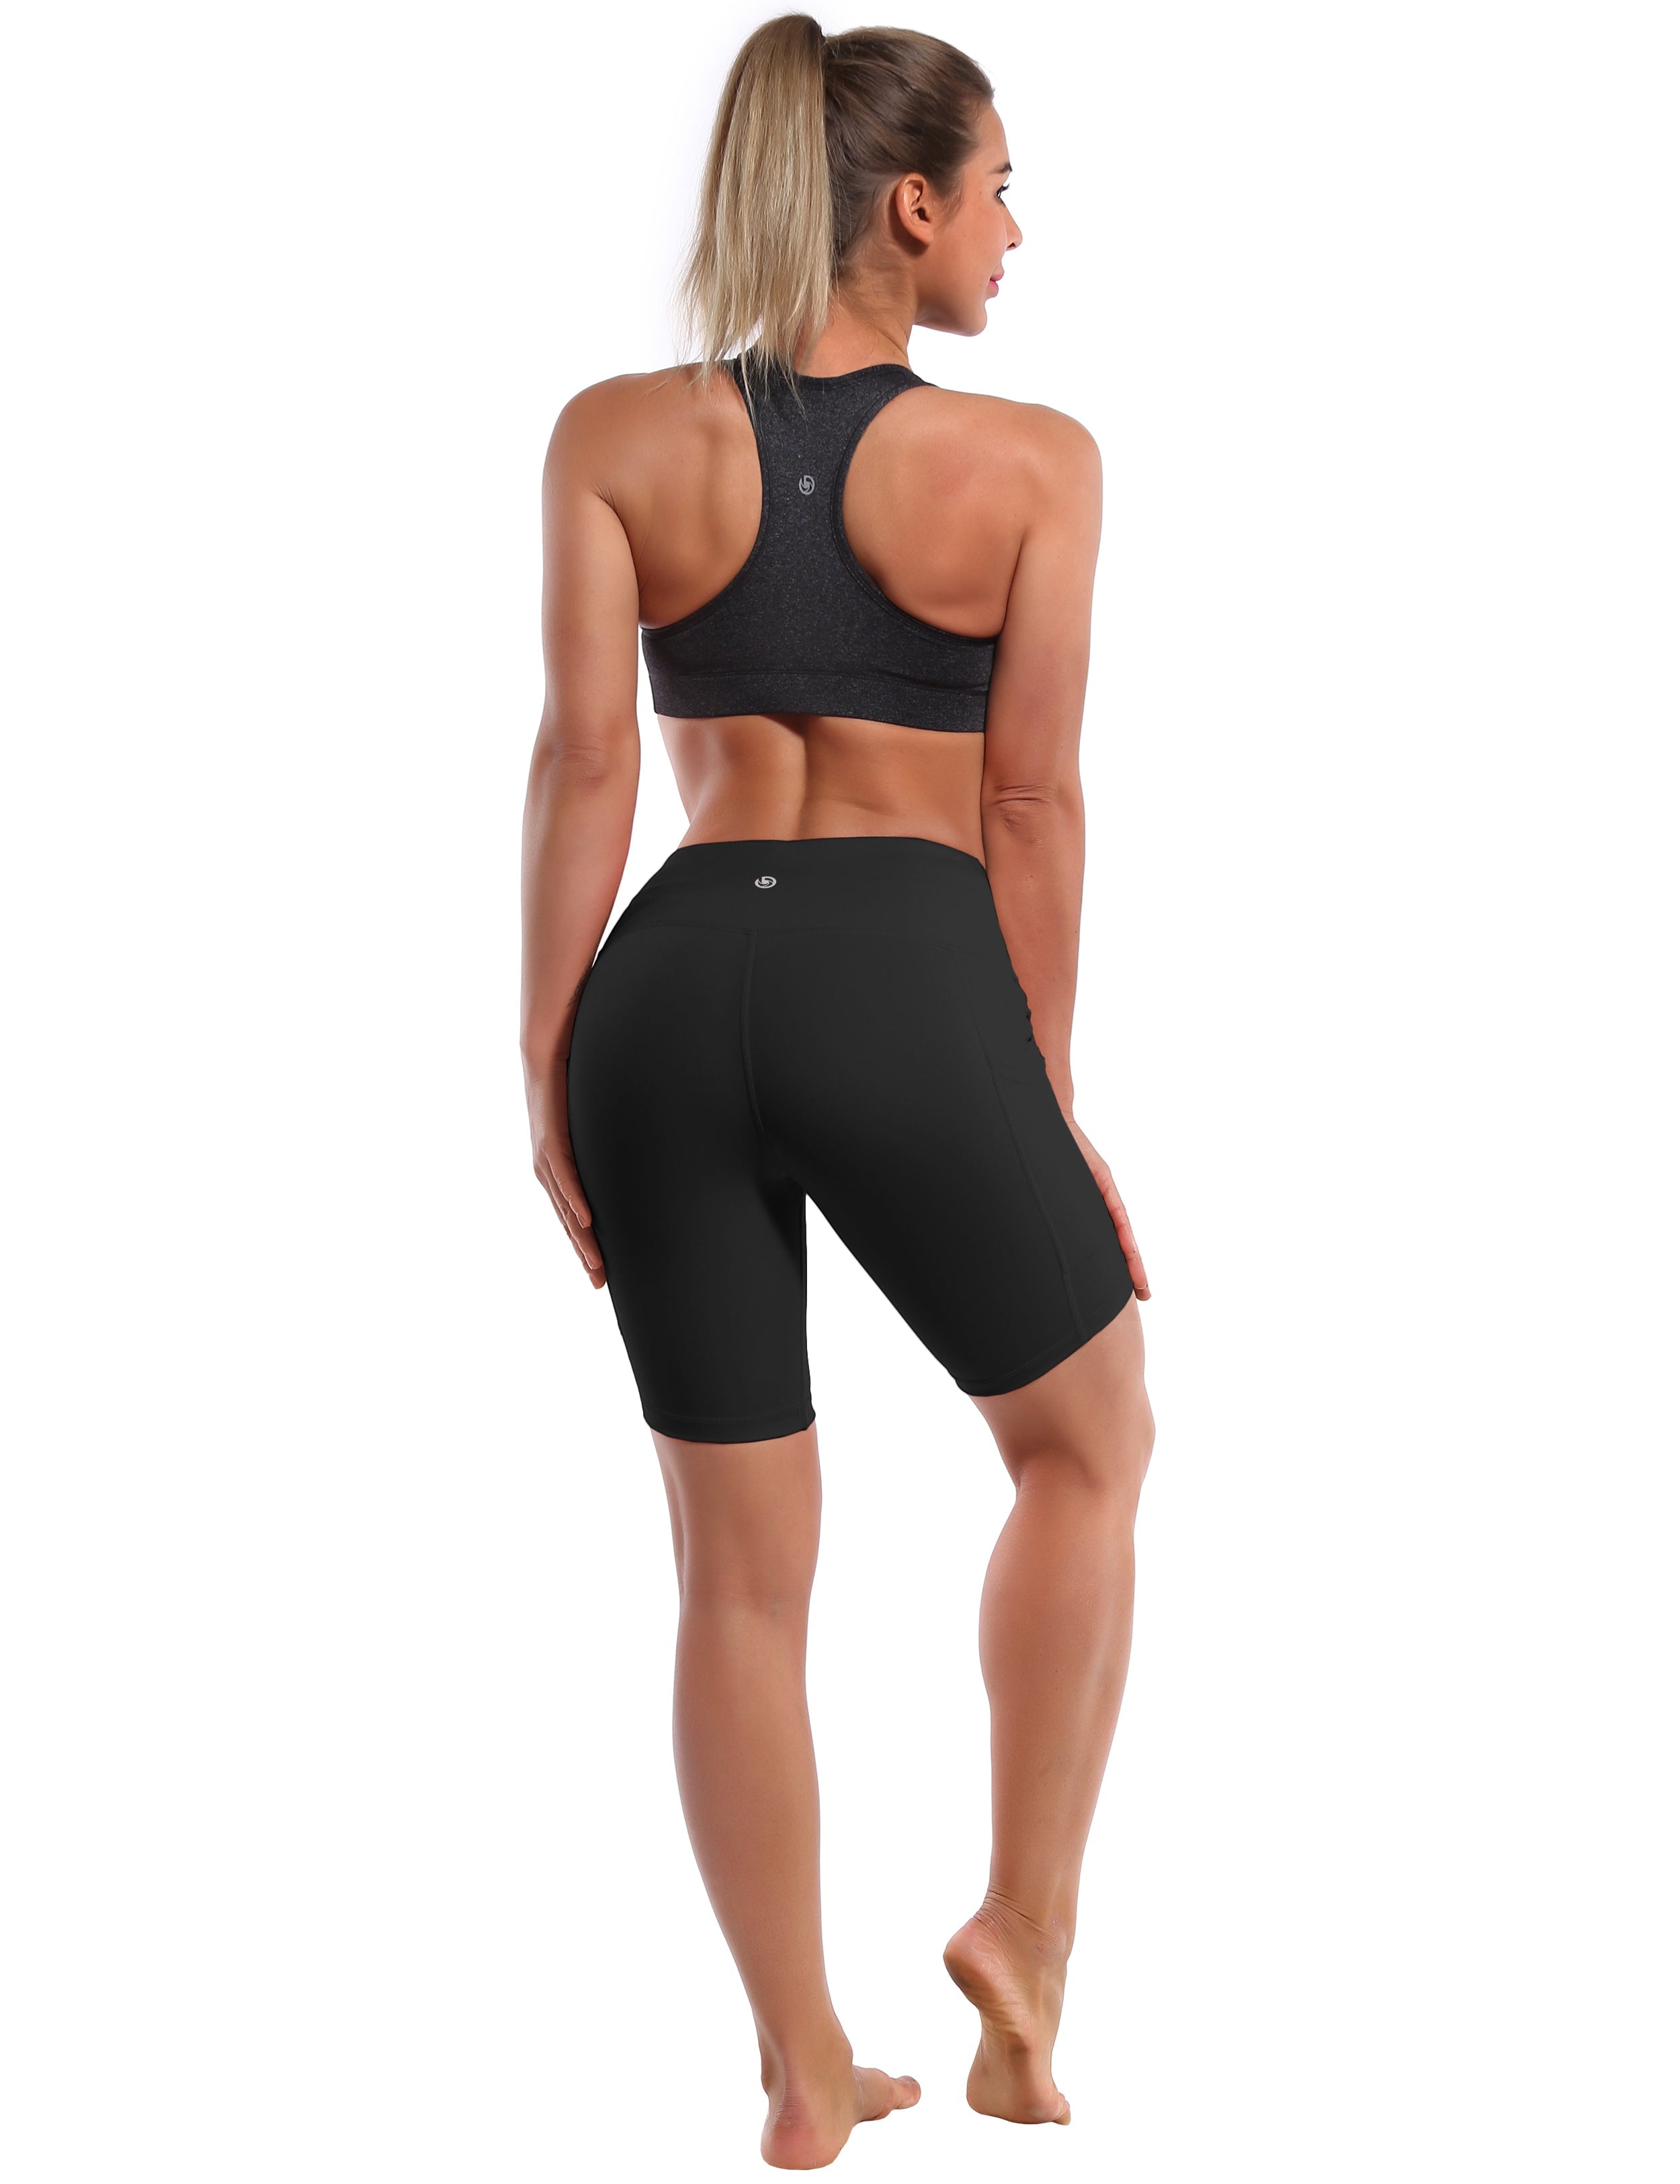 8" Side Pockets Pilates Shorts black Sleek, soft, smooth and totally comfortable: our newest style is here. Softest-ever fabric High elasticity High density 4-way stretch Fabric doesn't attract lint easily No see-through Moisture-wicking Machine wash 75% Nylon, 25% Spandex